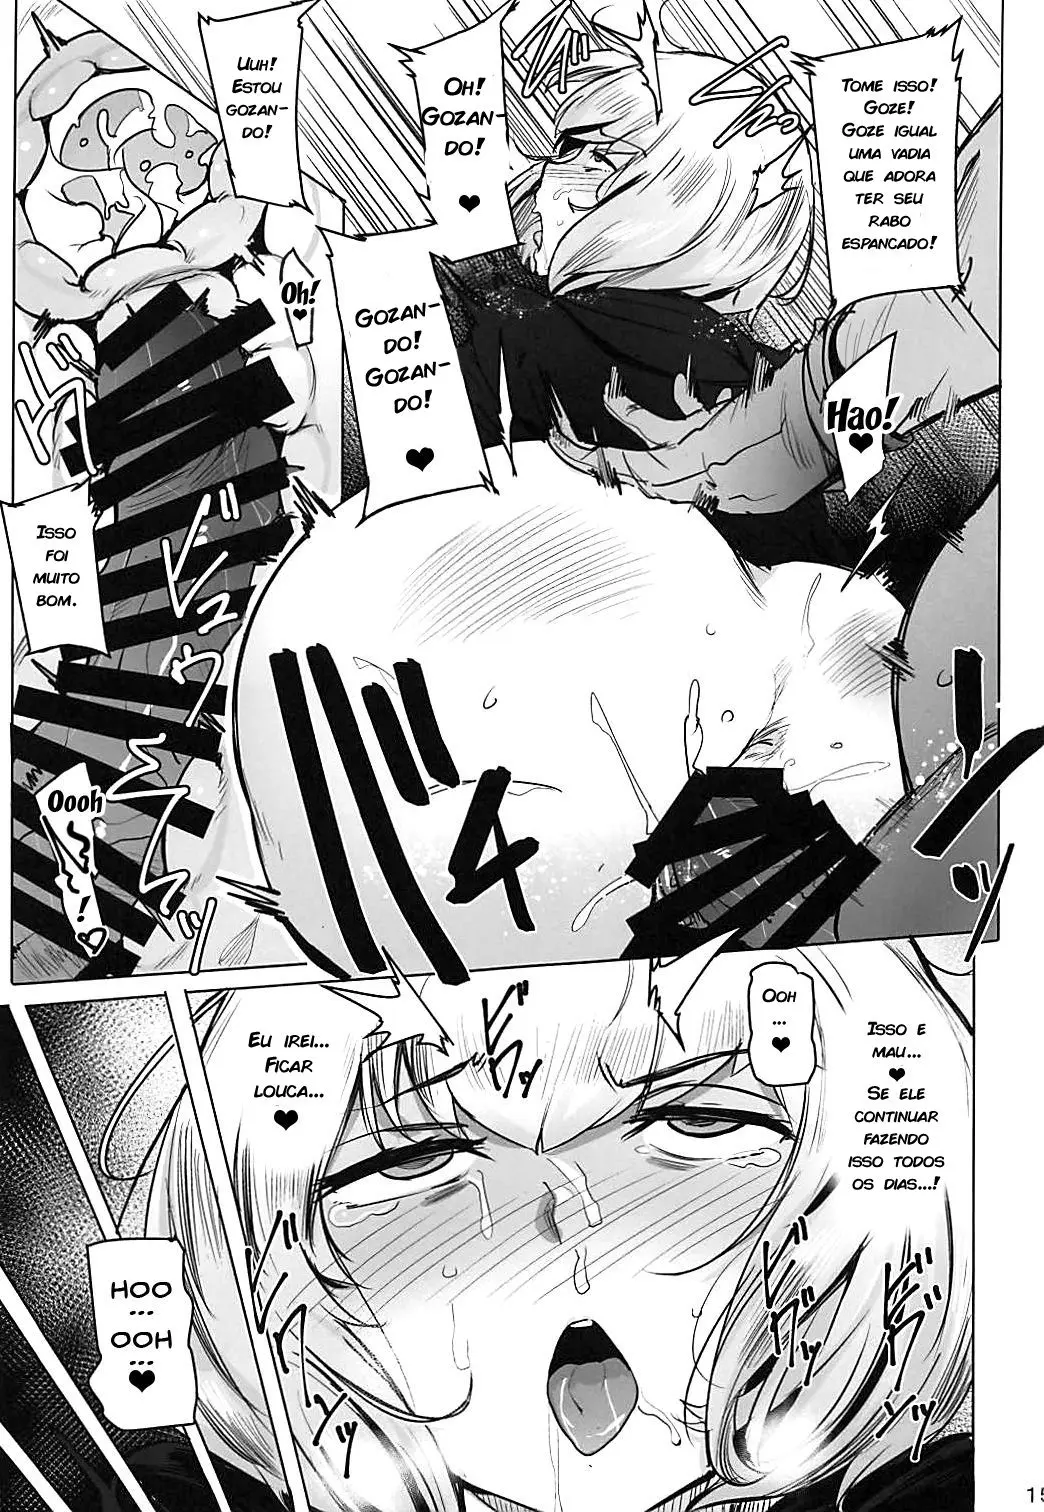 [Wakamesan] OVER HOLE (Overlord) - Foto 15